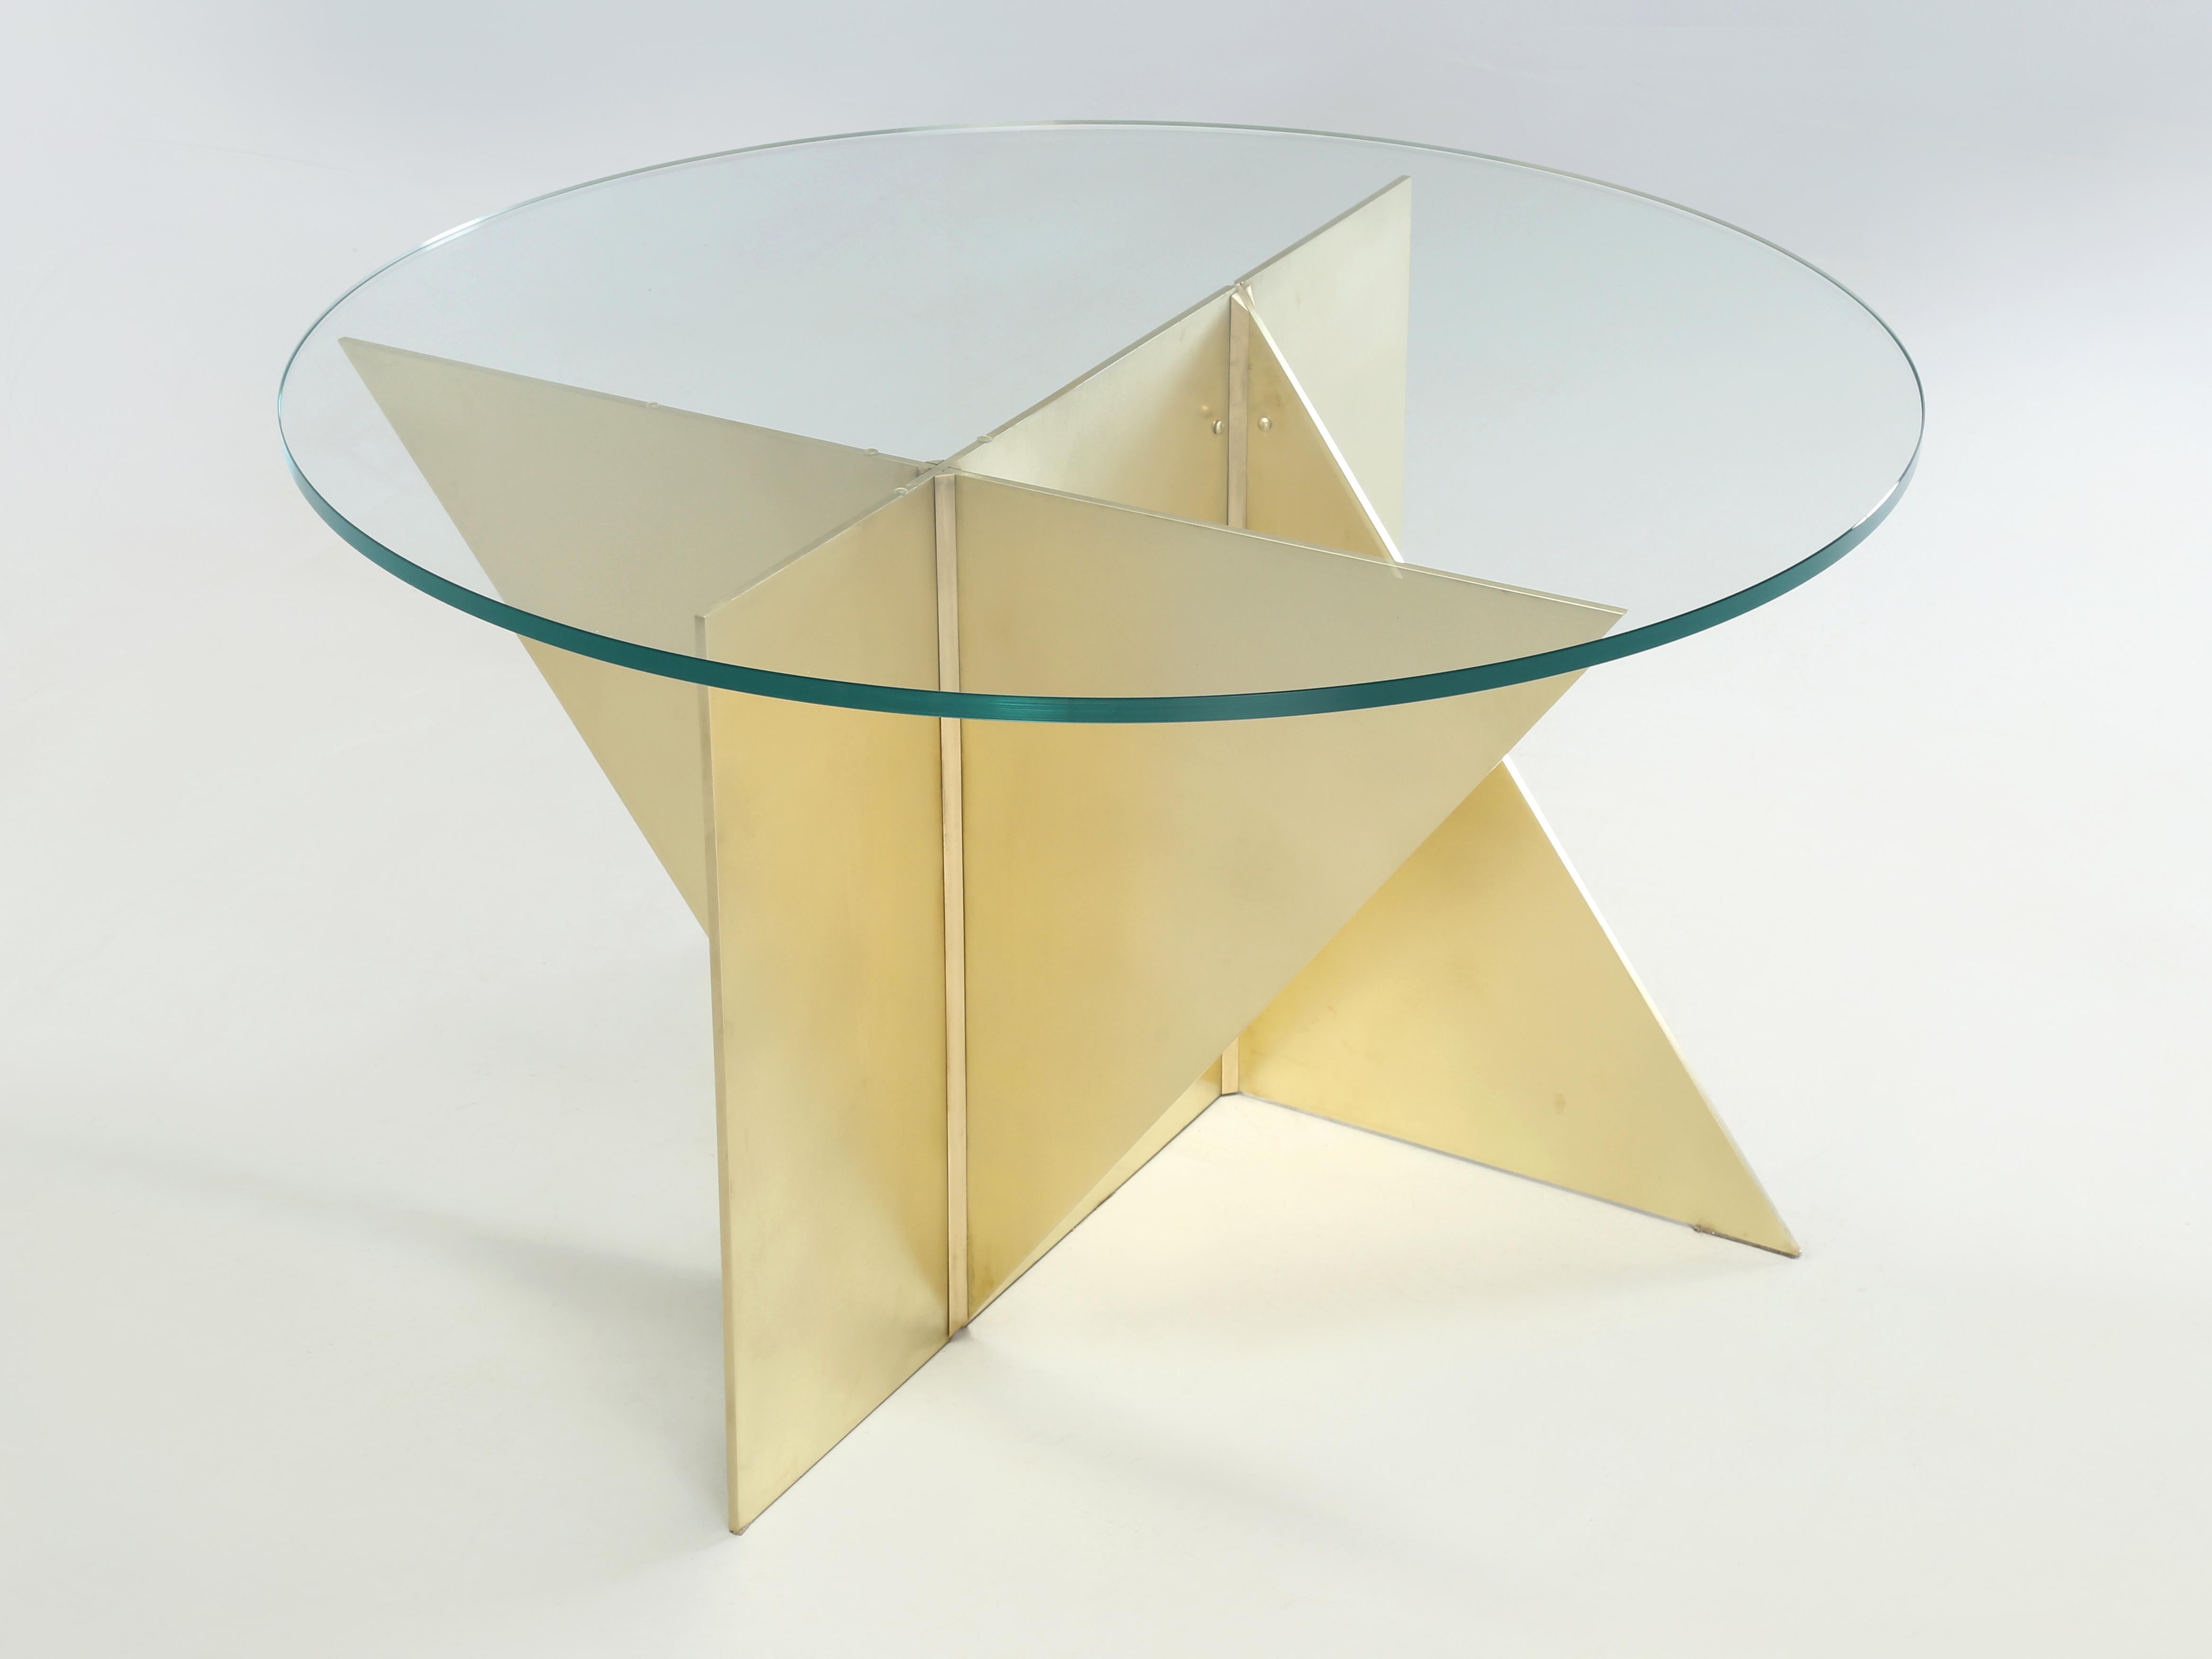 Modern Thick Solid Brass Center Hall Table or with a larger top can be used as a Dining Room Table. Currently as shown the Modern Brass Table is fitted with a thick glass and functions as a Center Hall Table, while optionally at no extra cost is an